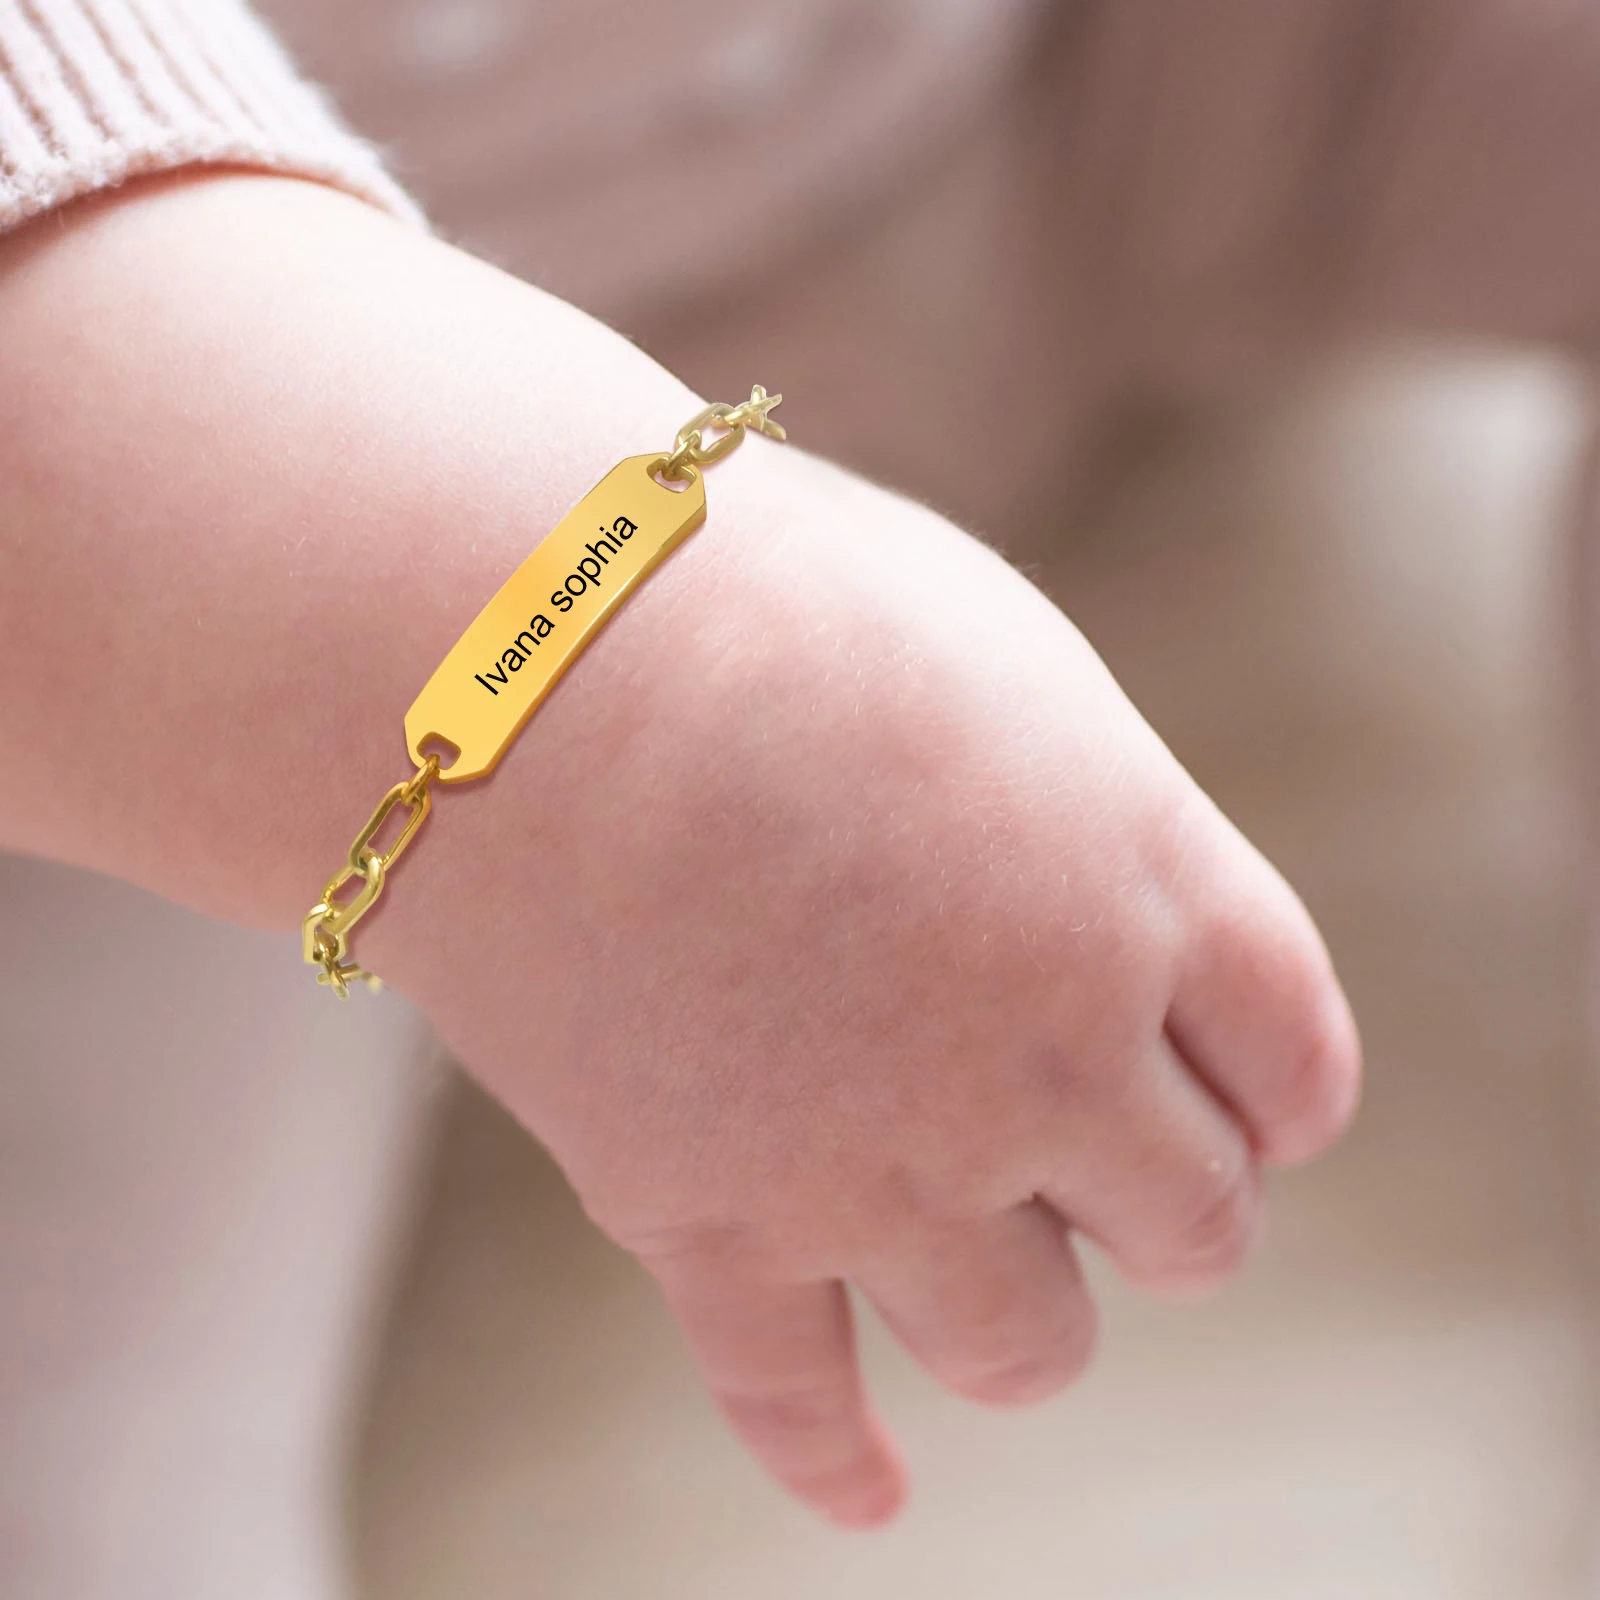 Gold Bracelets for Newborns and Toddlers - BeadifulBABY